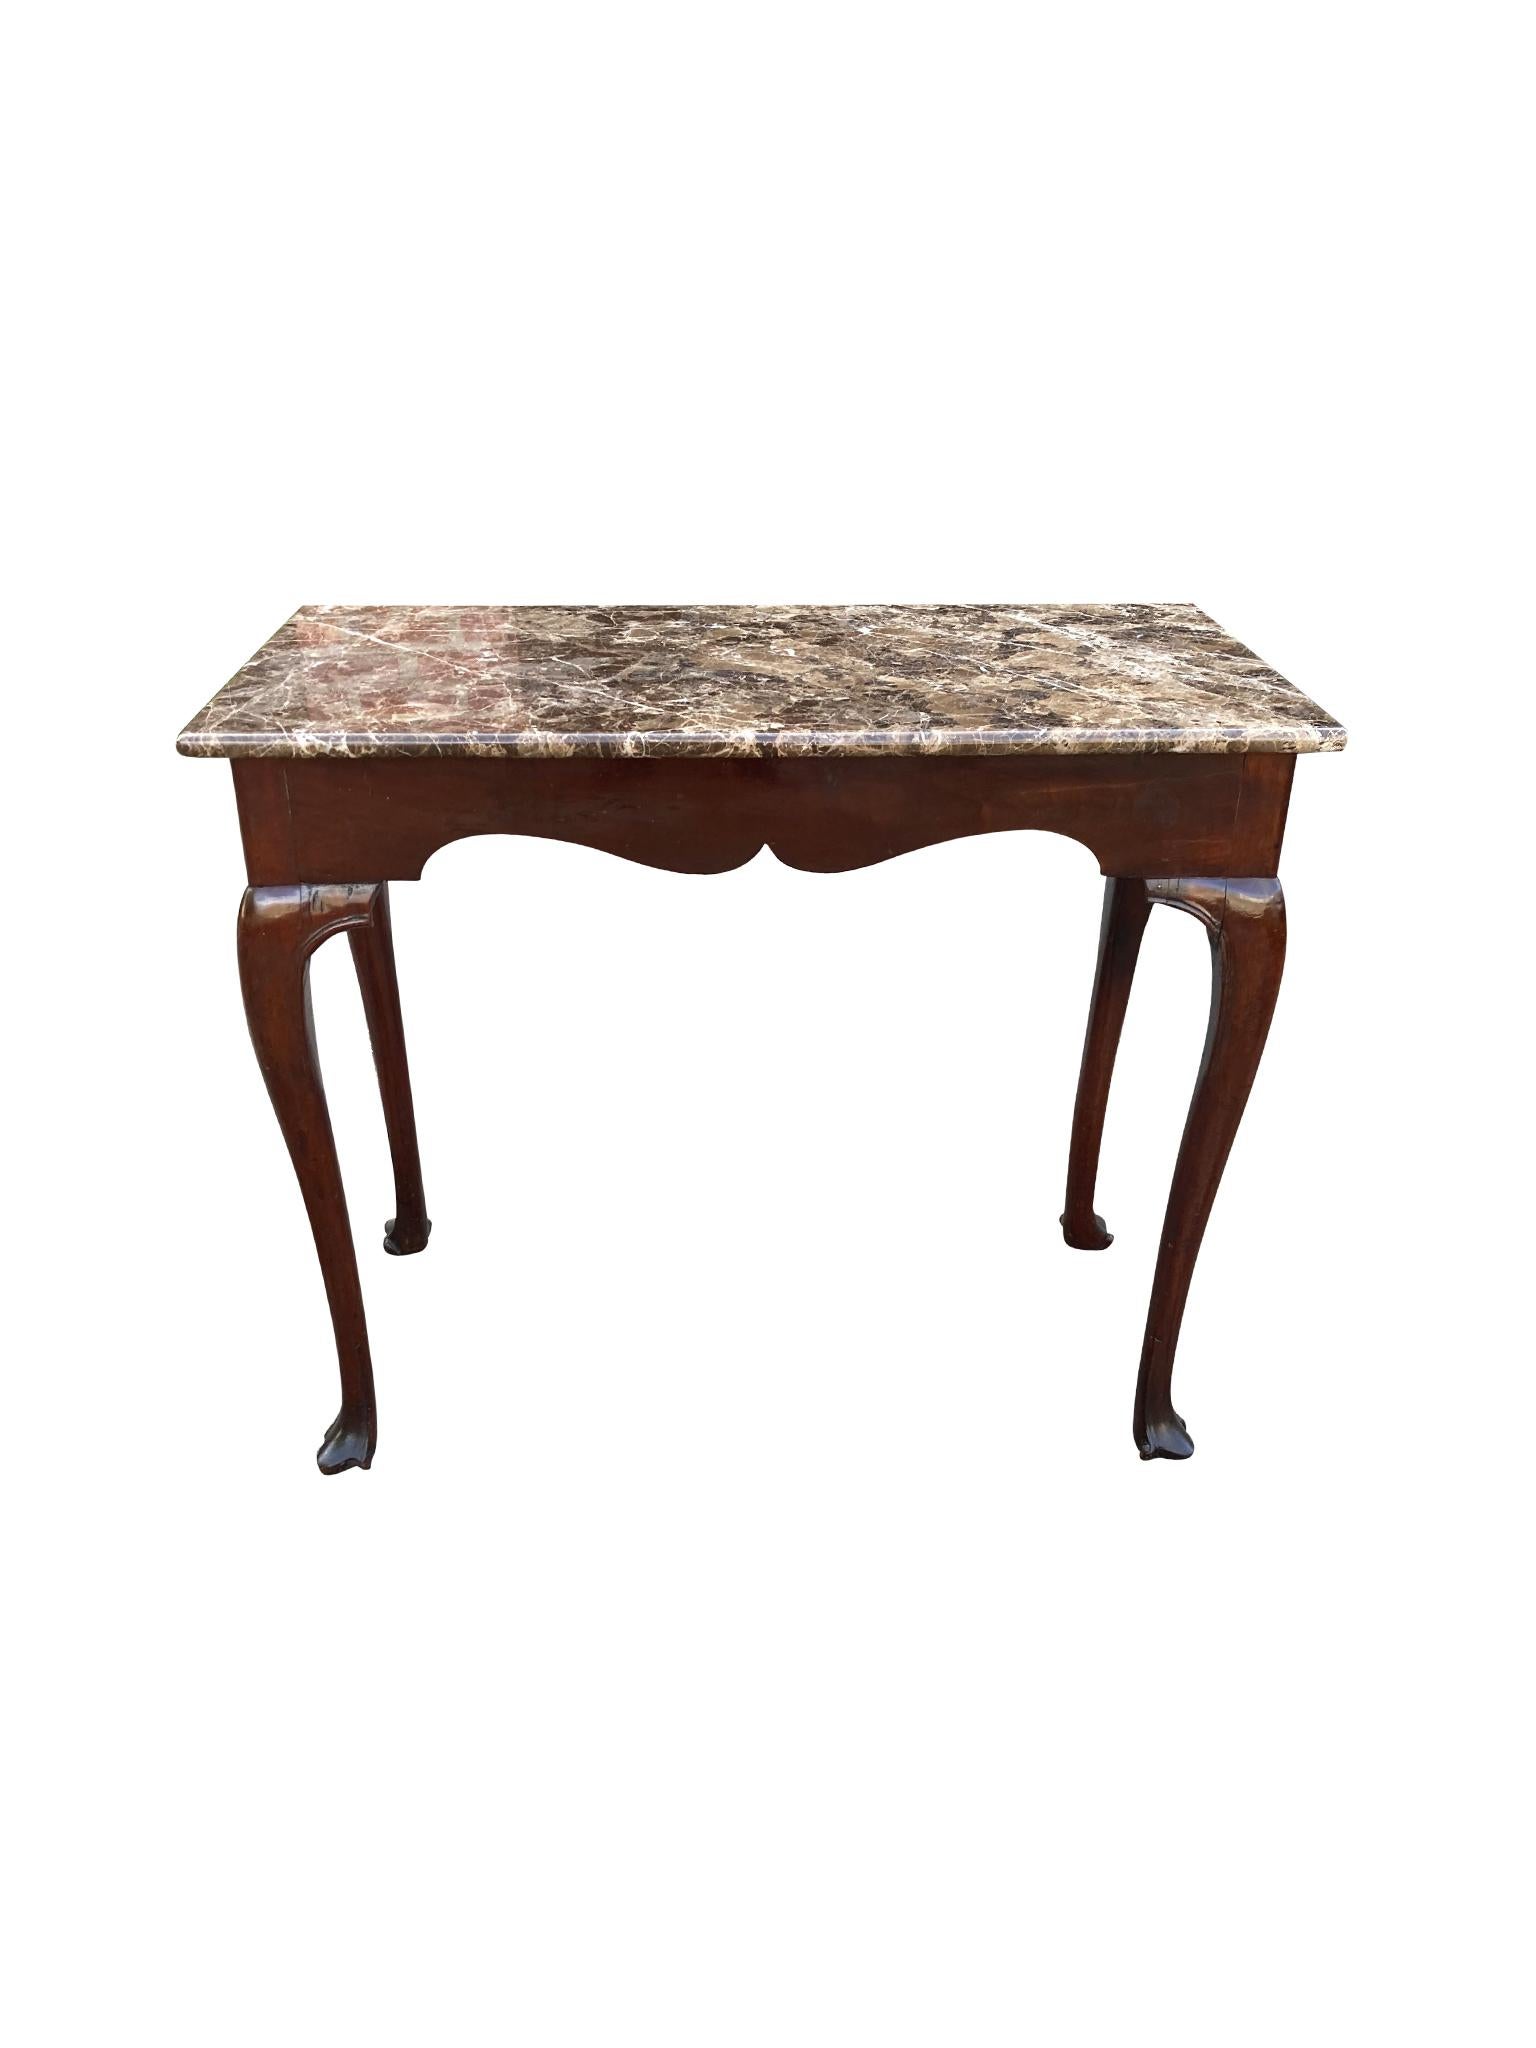 Antique Irish console table, crafted in the 18th century. This elegant piece is comprised of a hardwood base and a marble table top. Its design is one of symmetry and balance: thin cabriole legs that curve upward to a front skirt fashioned into a